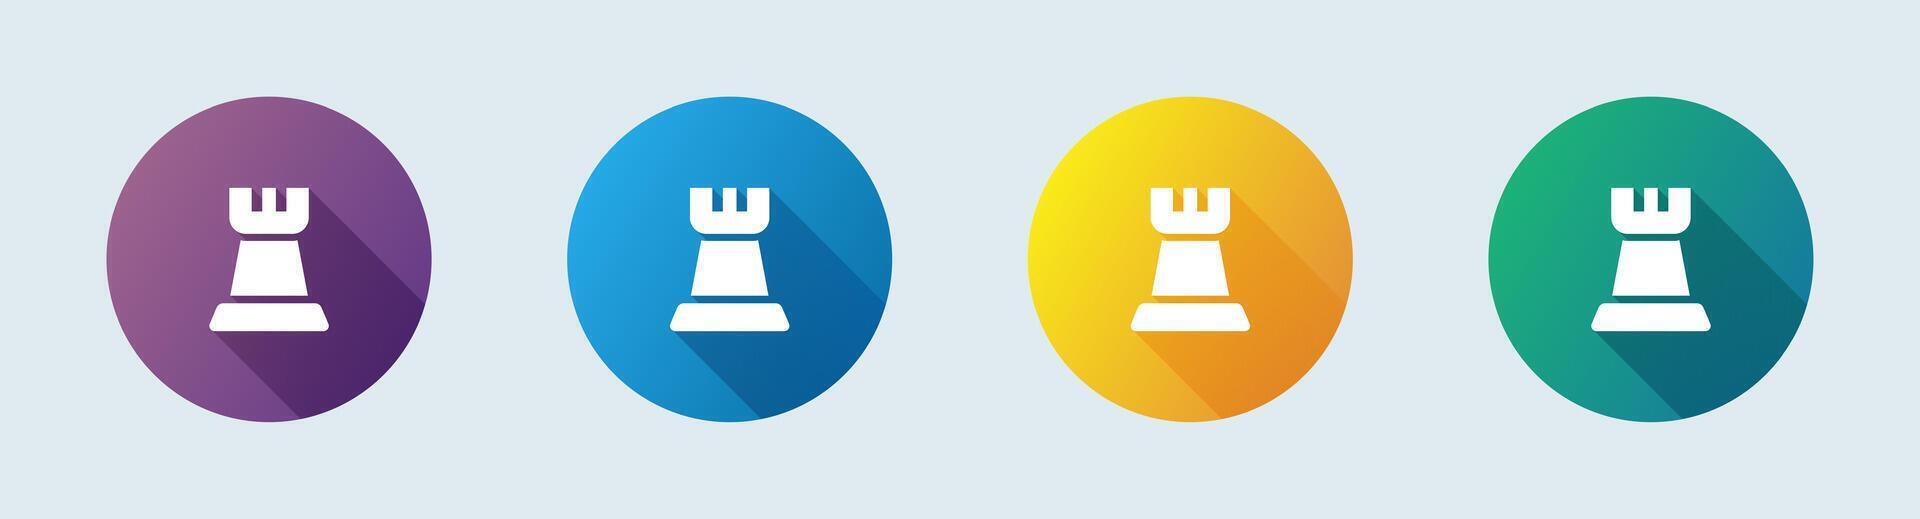 Chess solid icon in flat design style. Board game signs vector illustration.